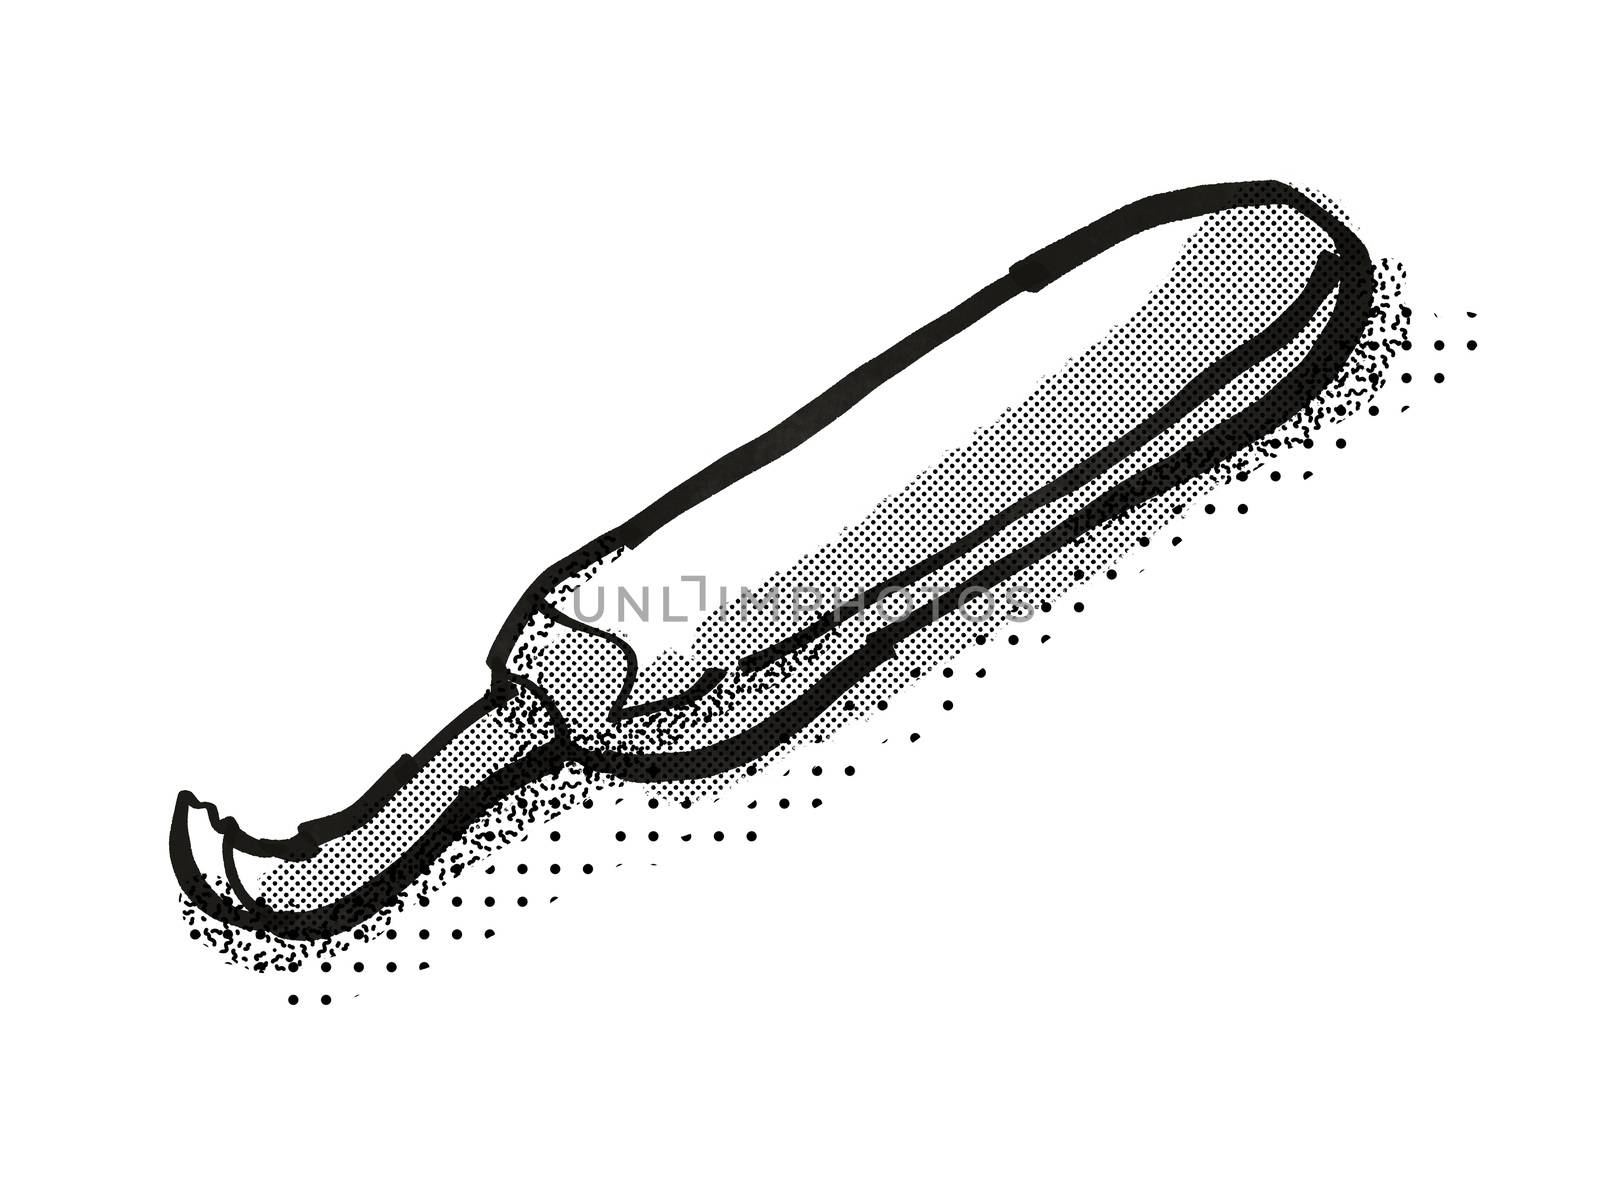 Retro cartoon style drawing of a hook knife, crook knife or spoon carving knife , a woodworking hand tool  on isolated white background done in black and white